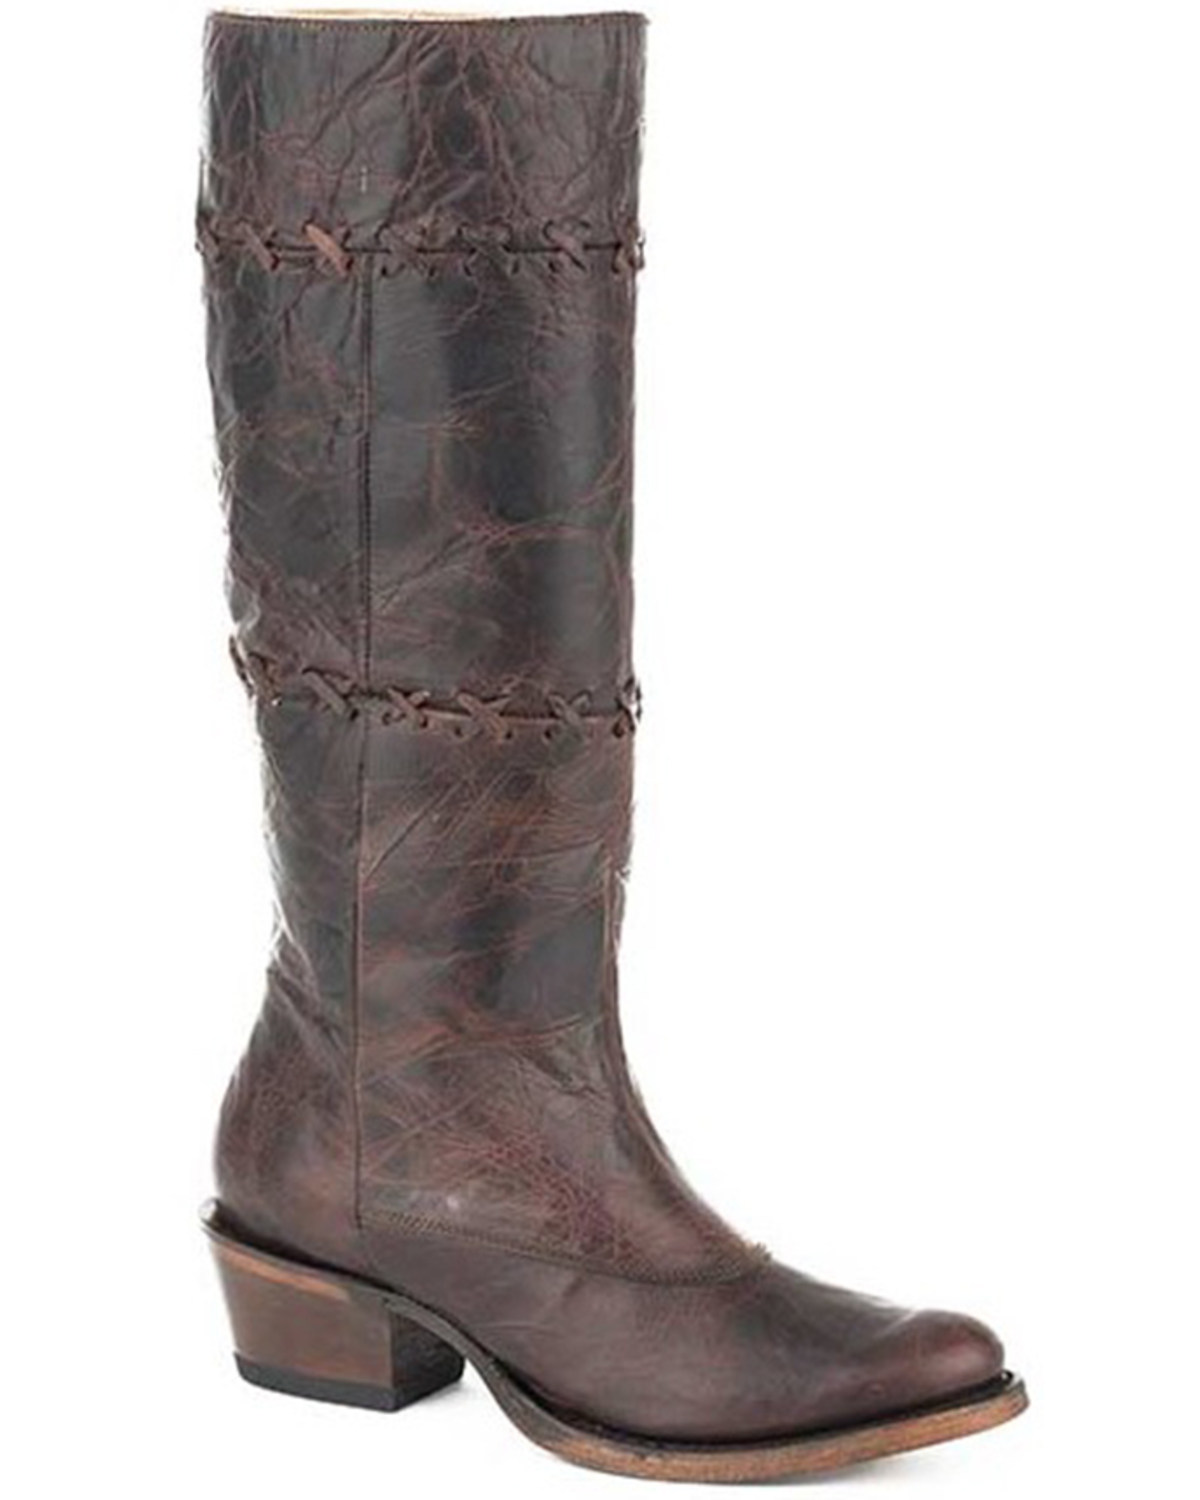 Stetson Women's Blythe Western Boots - Pointed Toe